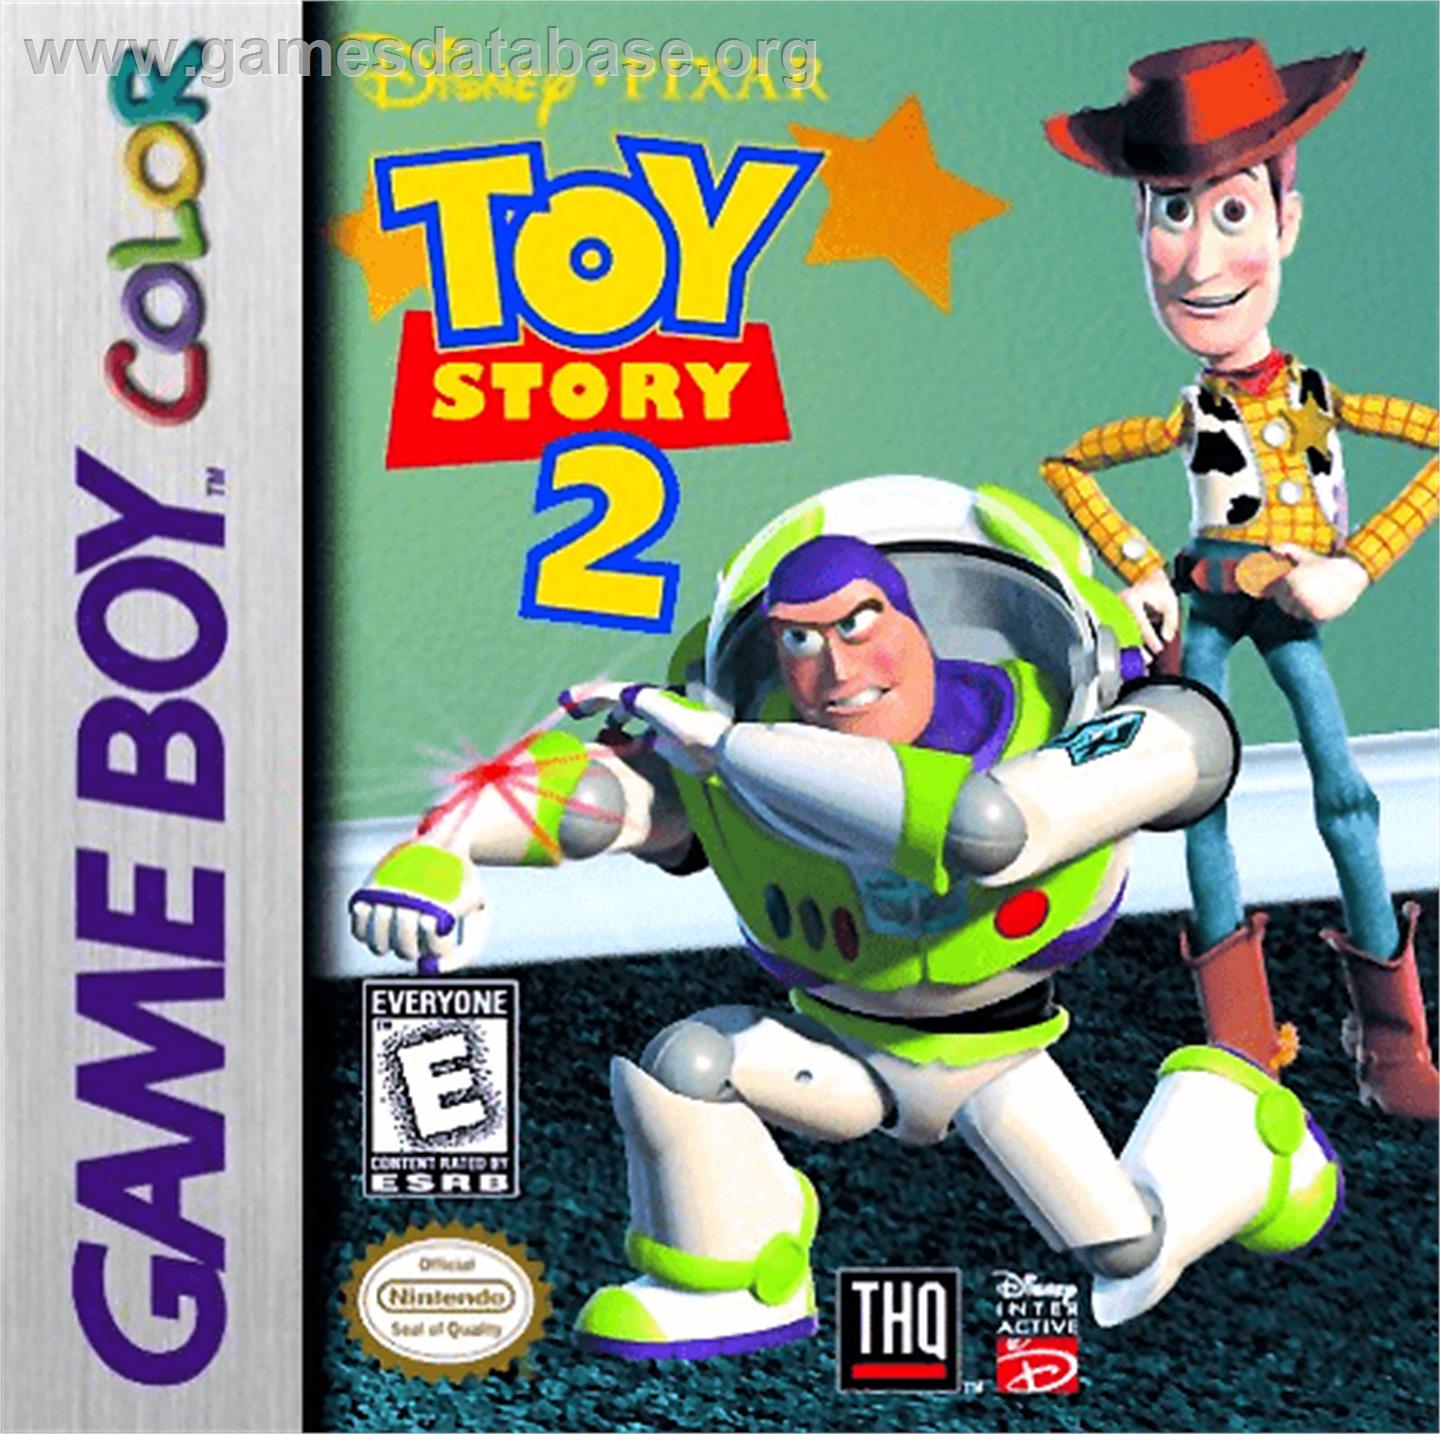 Toy Story 2: Buzz Lightyear to the Rescue - Nintendo Game Boy Color - Artwork - Box